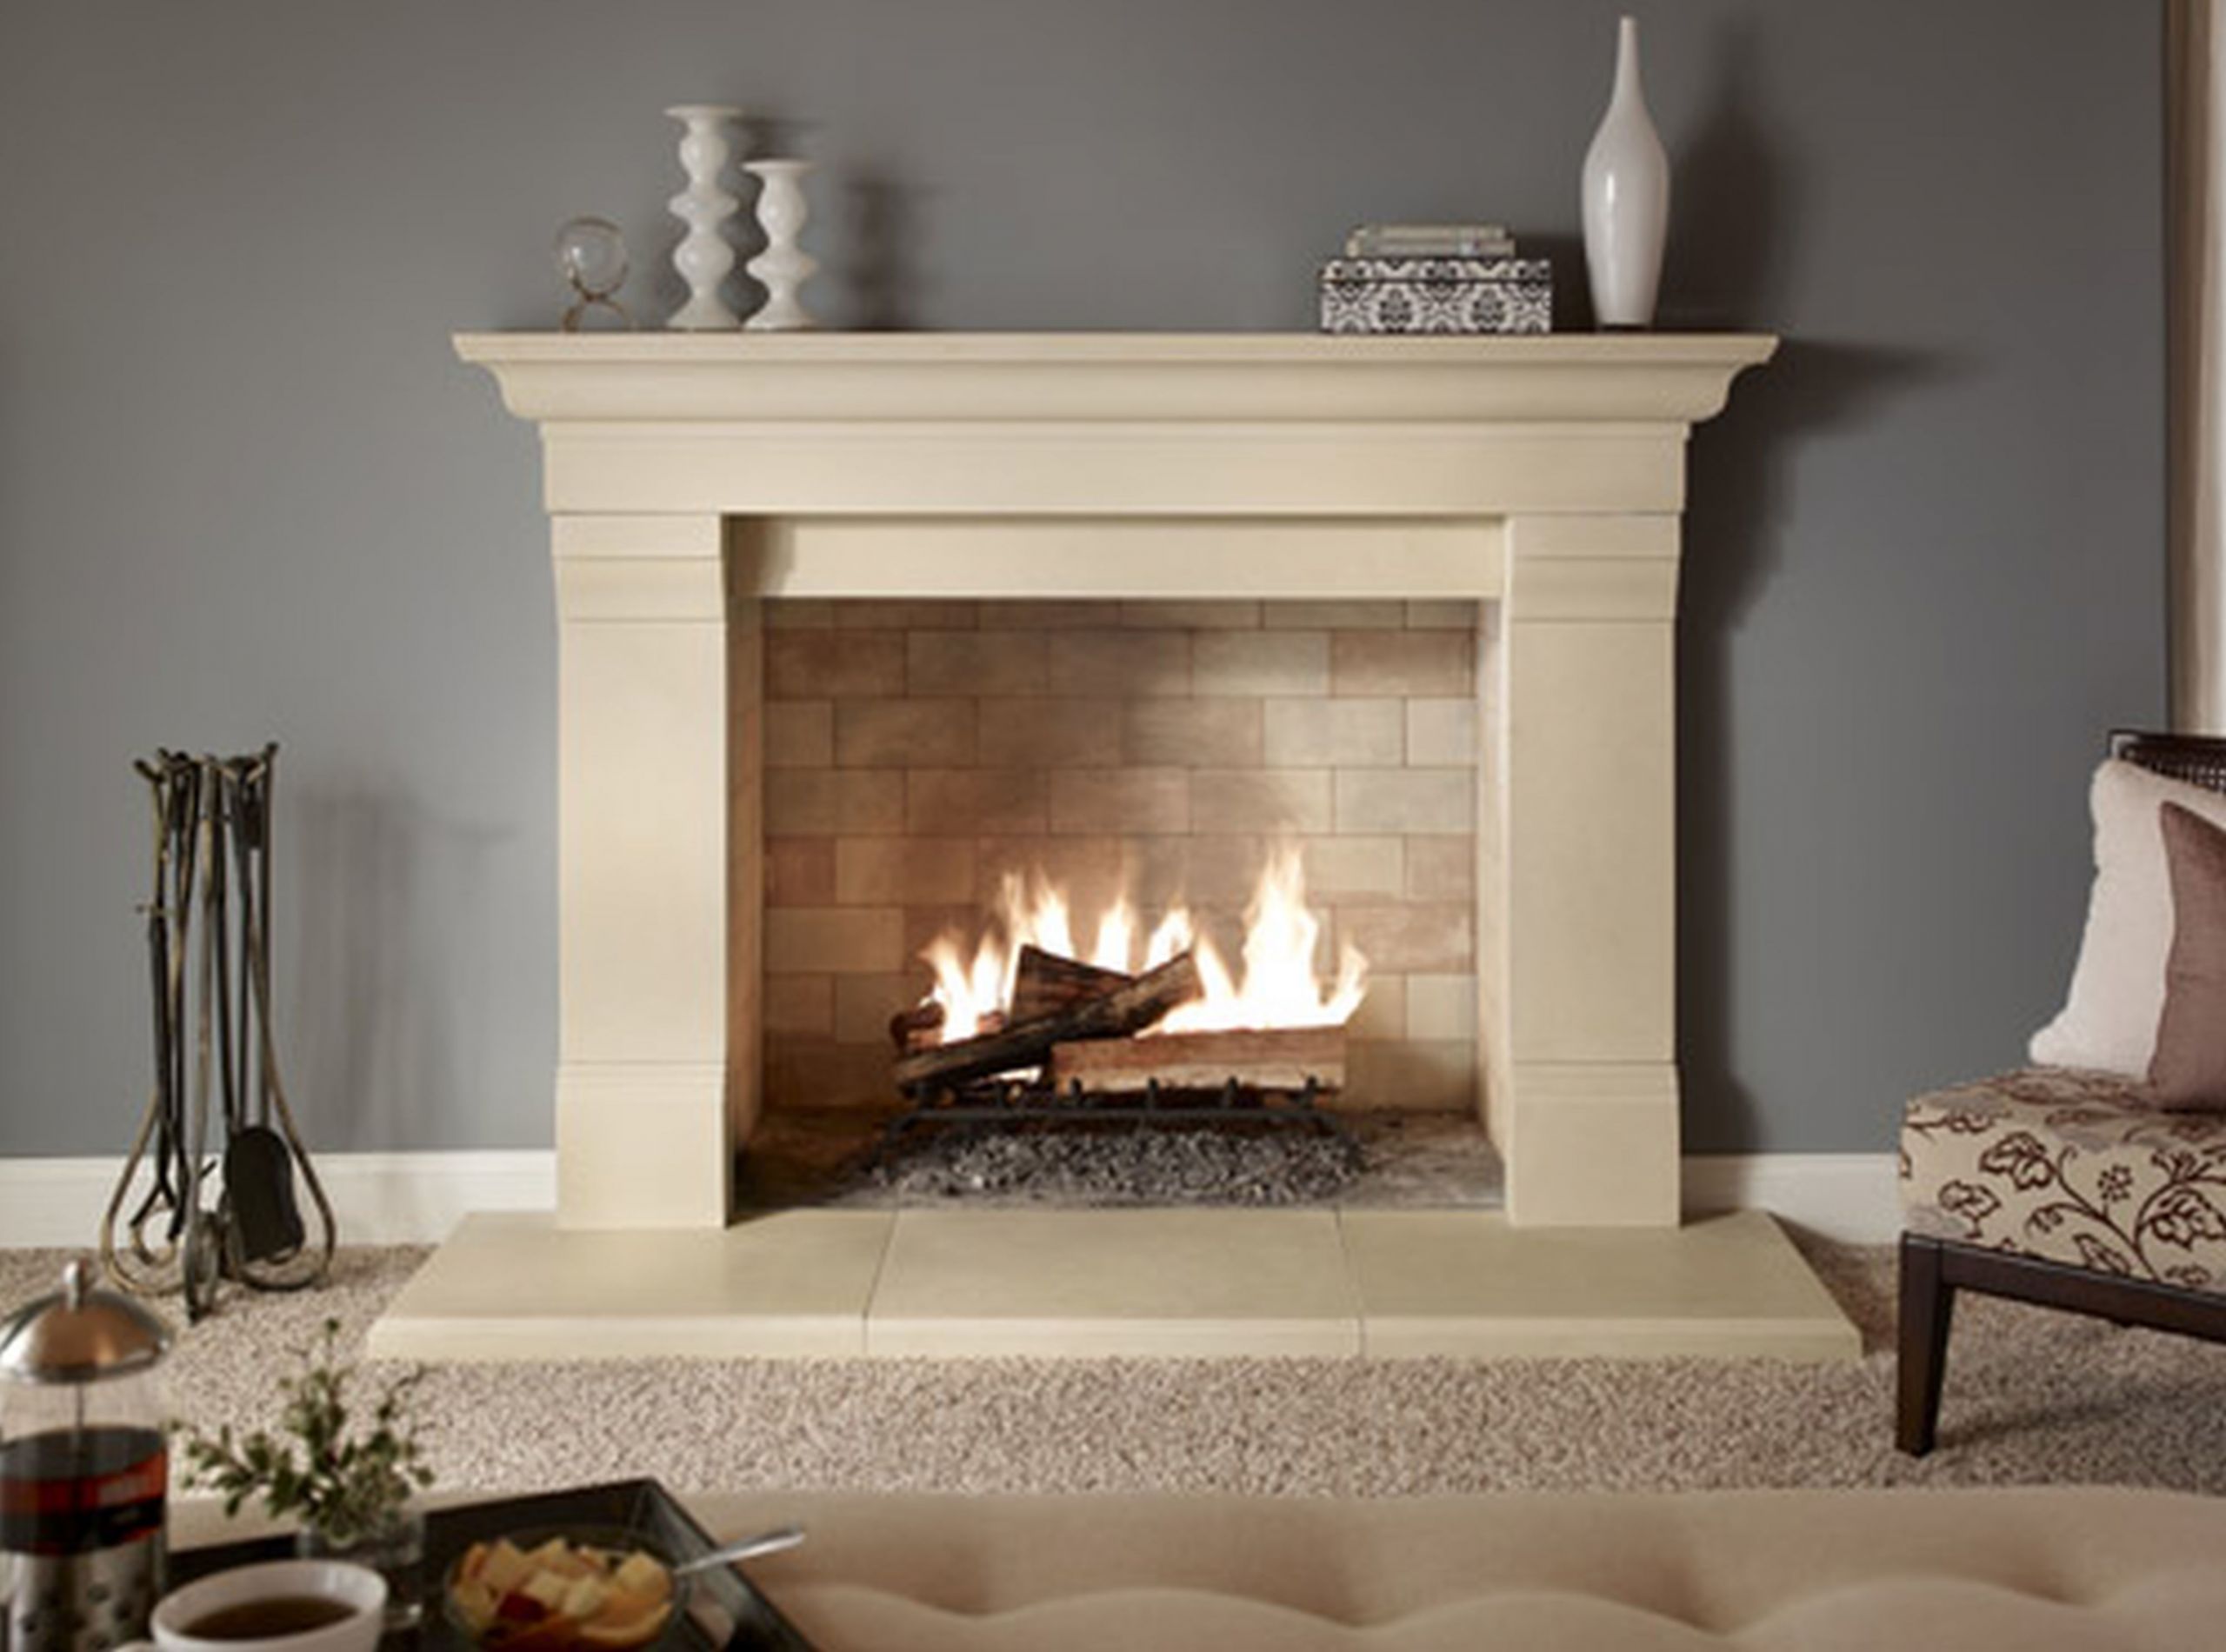 Stone Fireplace with Wood Mantel Awesome Fireplace Contemporary Fireplace Mantels with Rock Wall